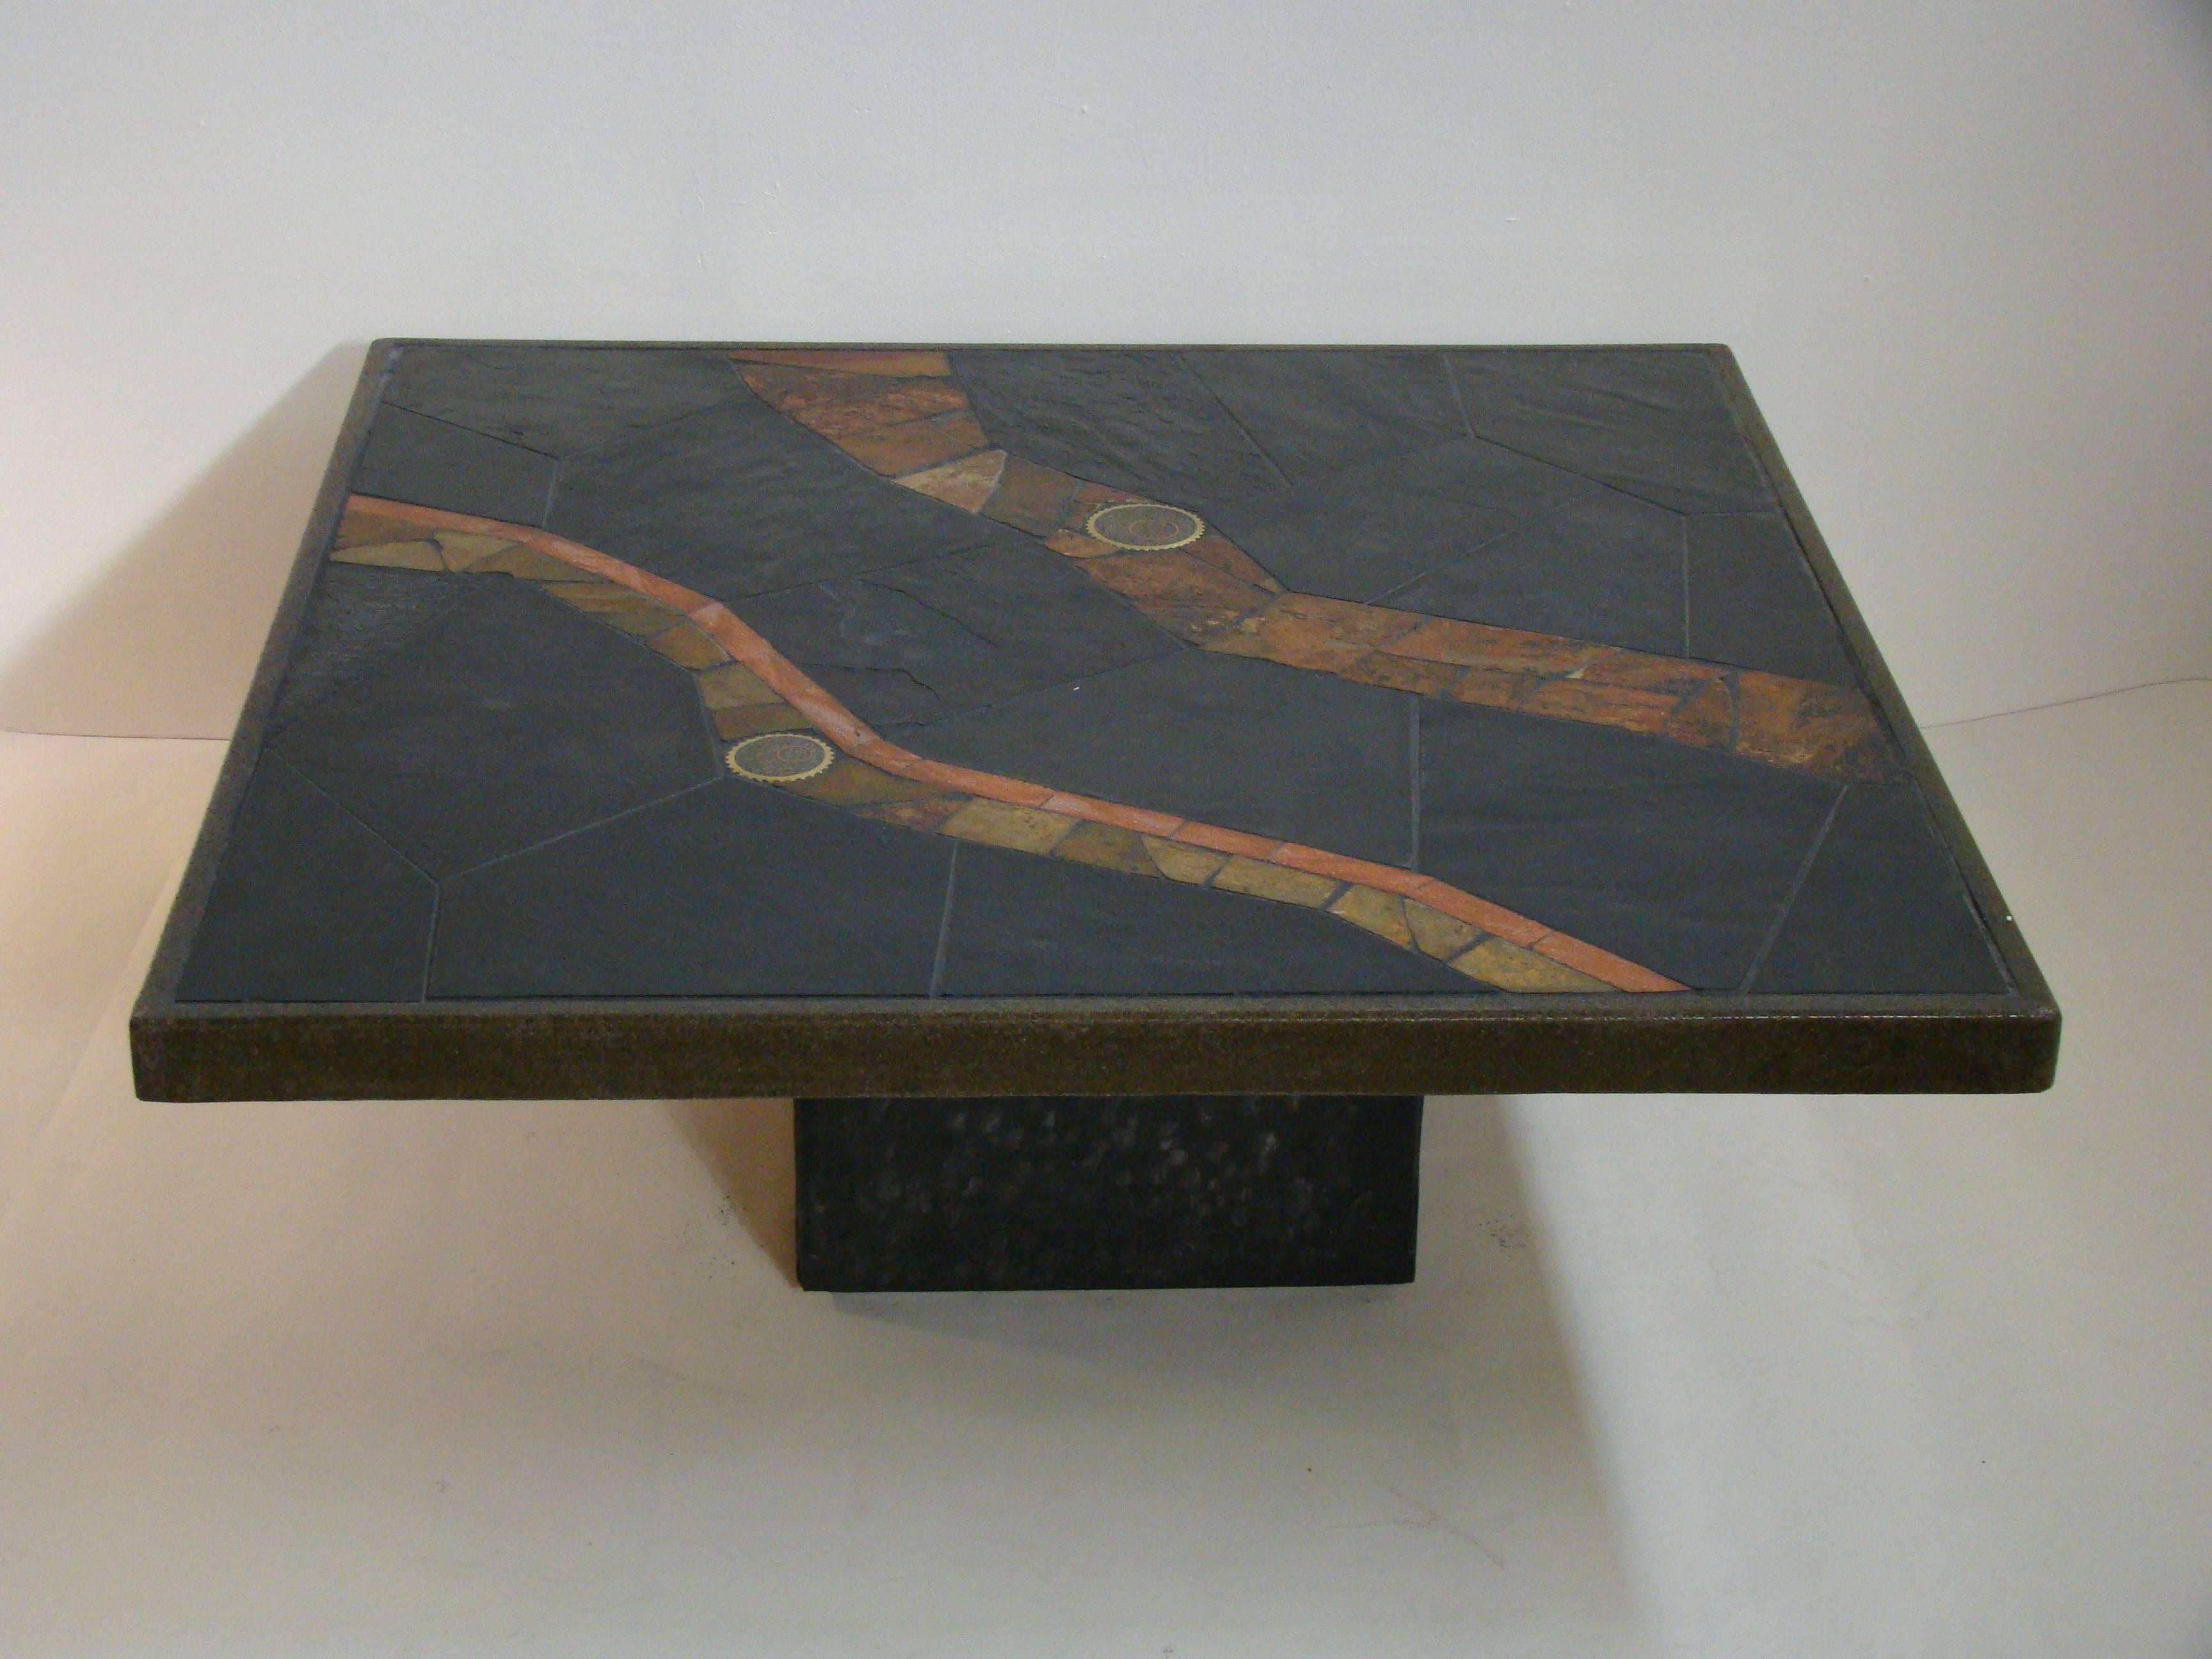 Late 20th Century African Slate Mosaic Tile Coffee Table in the Manner of Paul Kingma